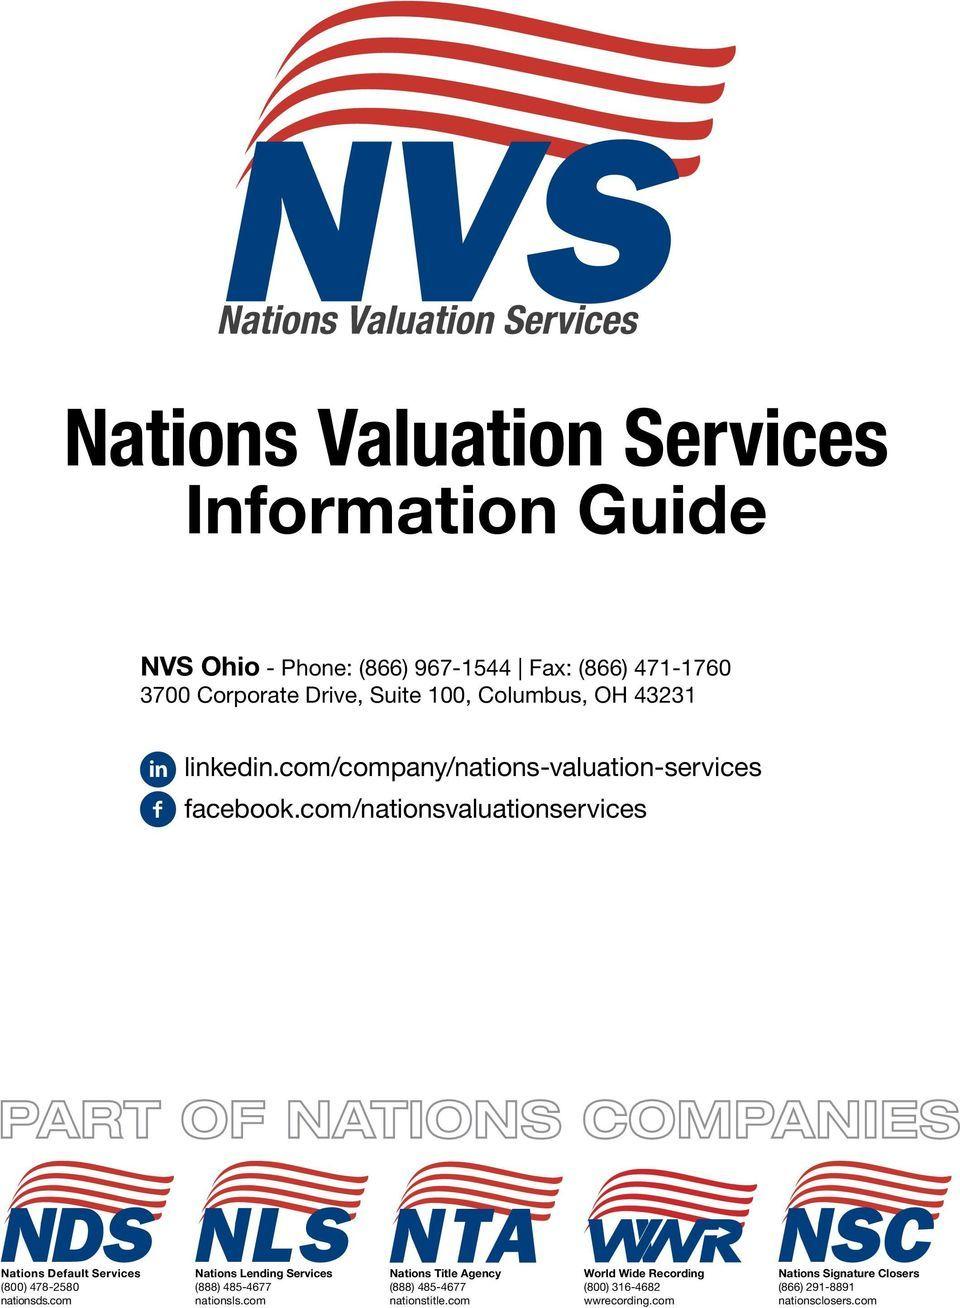 Nations Lending Logo - Nations Valuation Services